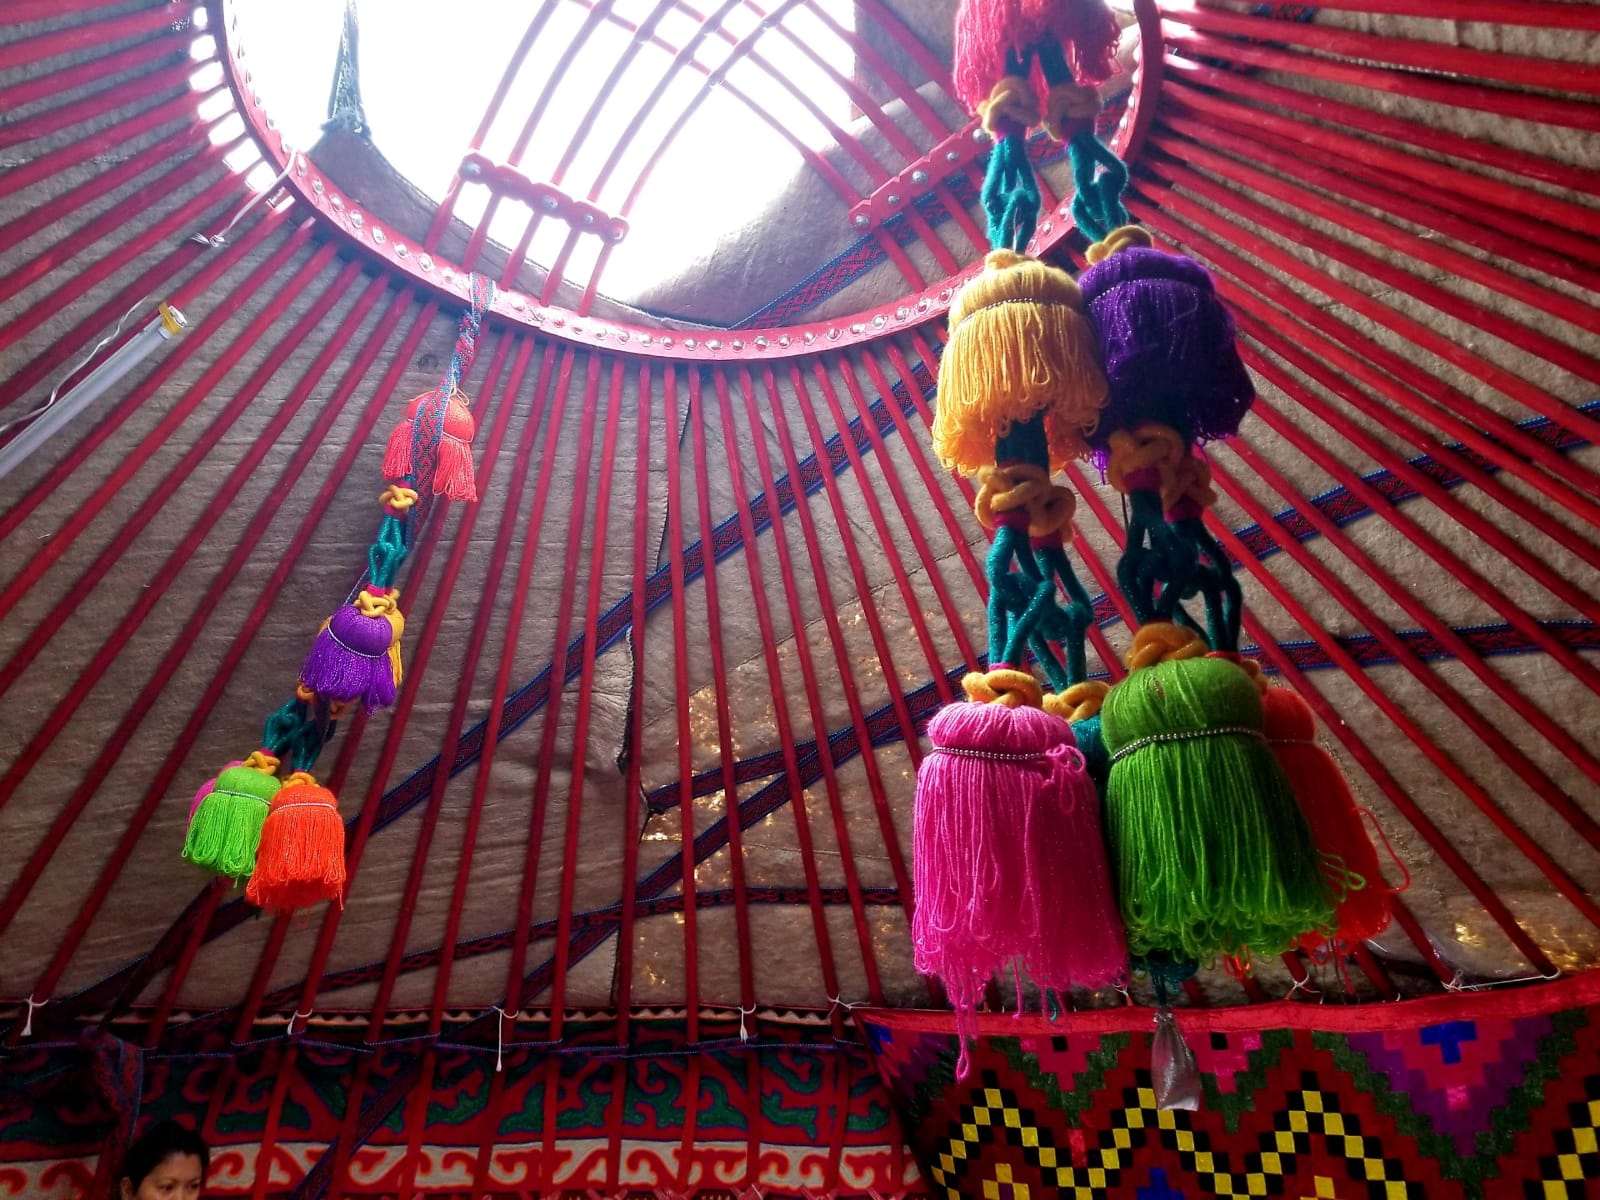 The roof of Kyrgyz 'yurt'